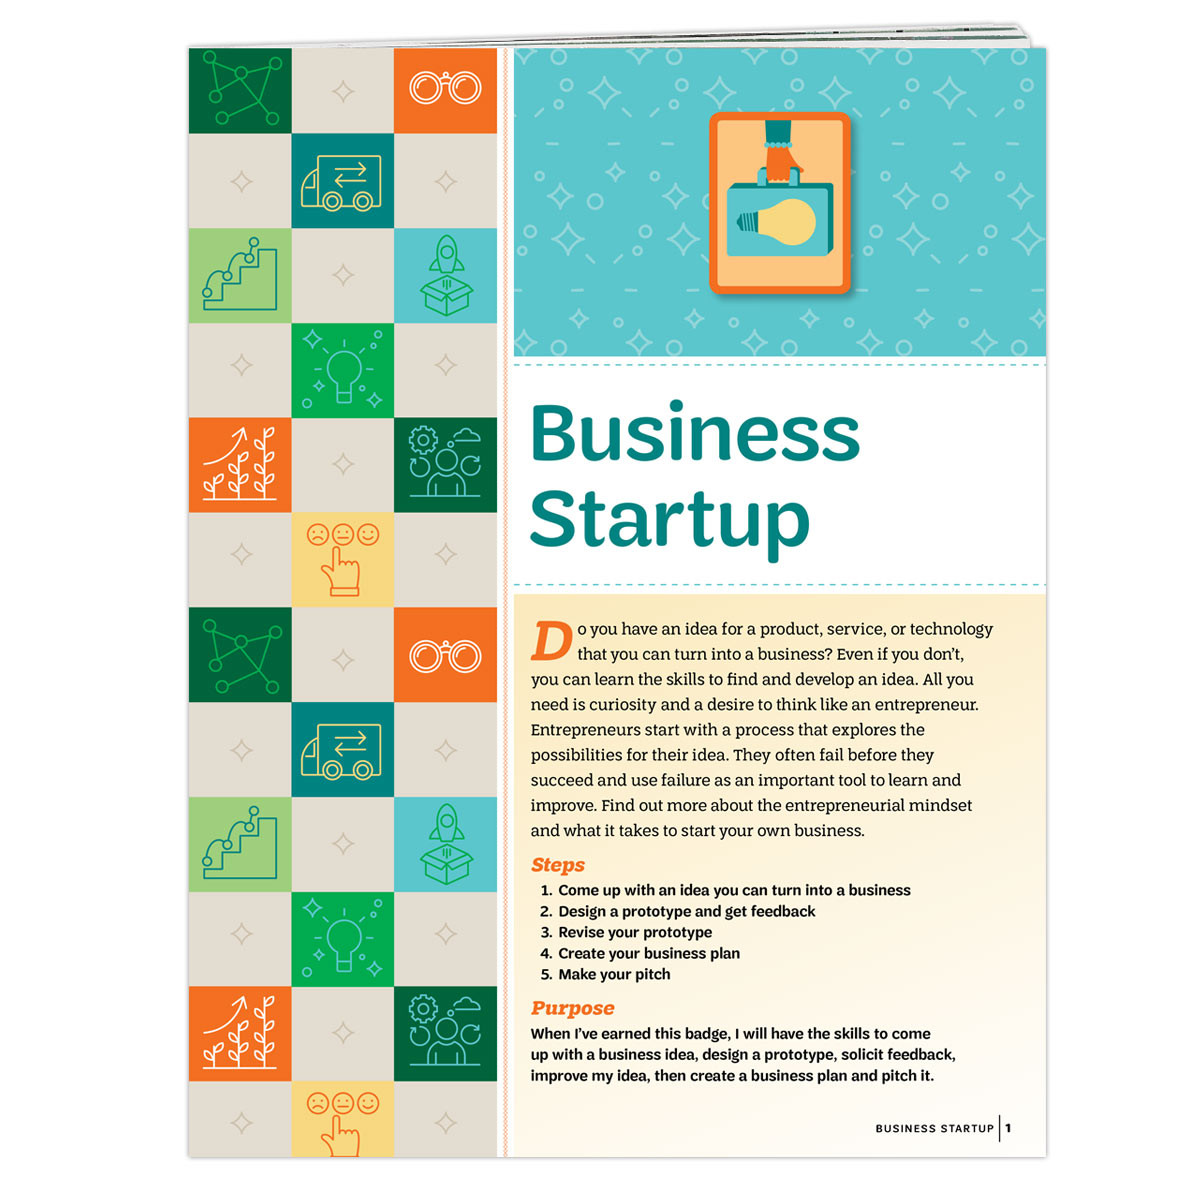 Business Startup Badge Requirements